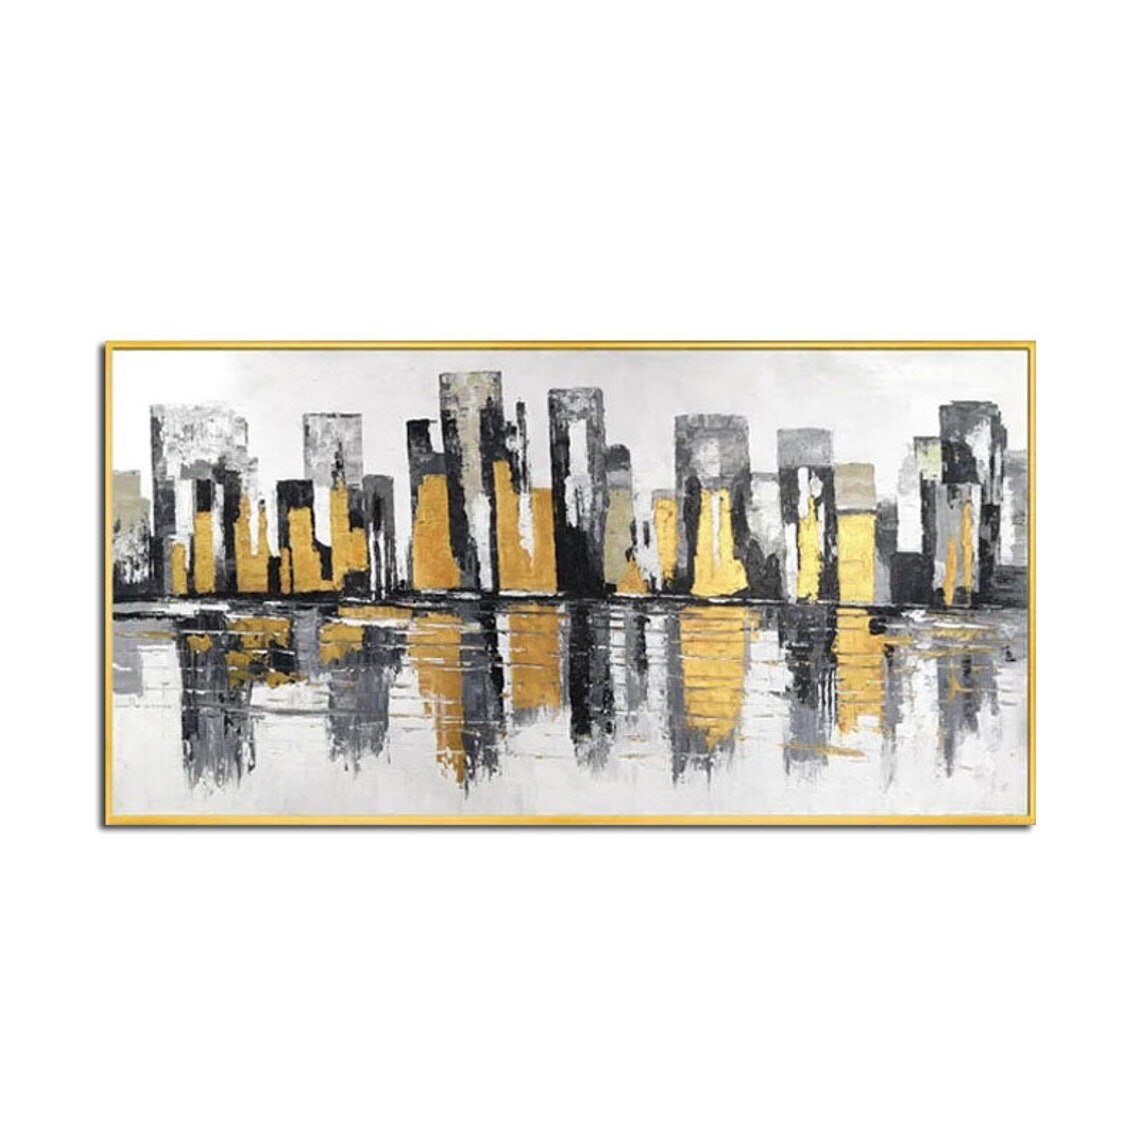 100% Canvas Modern Abstract Architecture Hand-Made Oil Painting